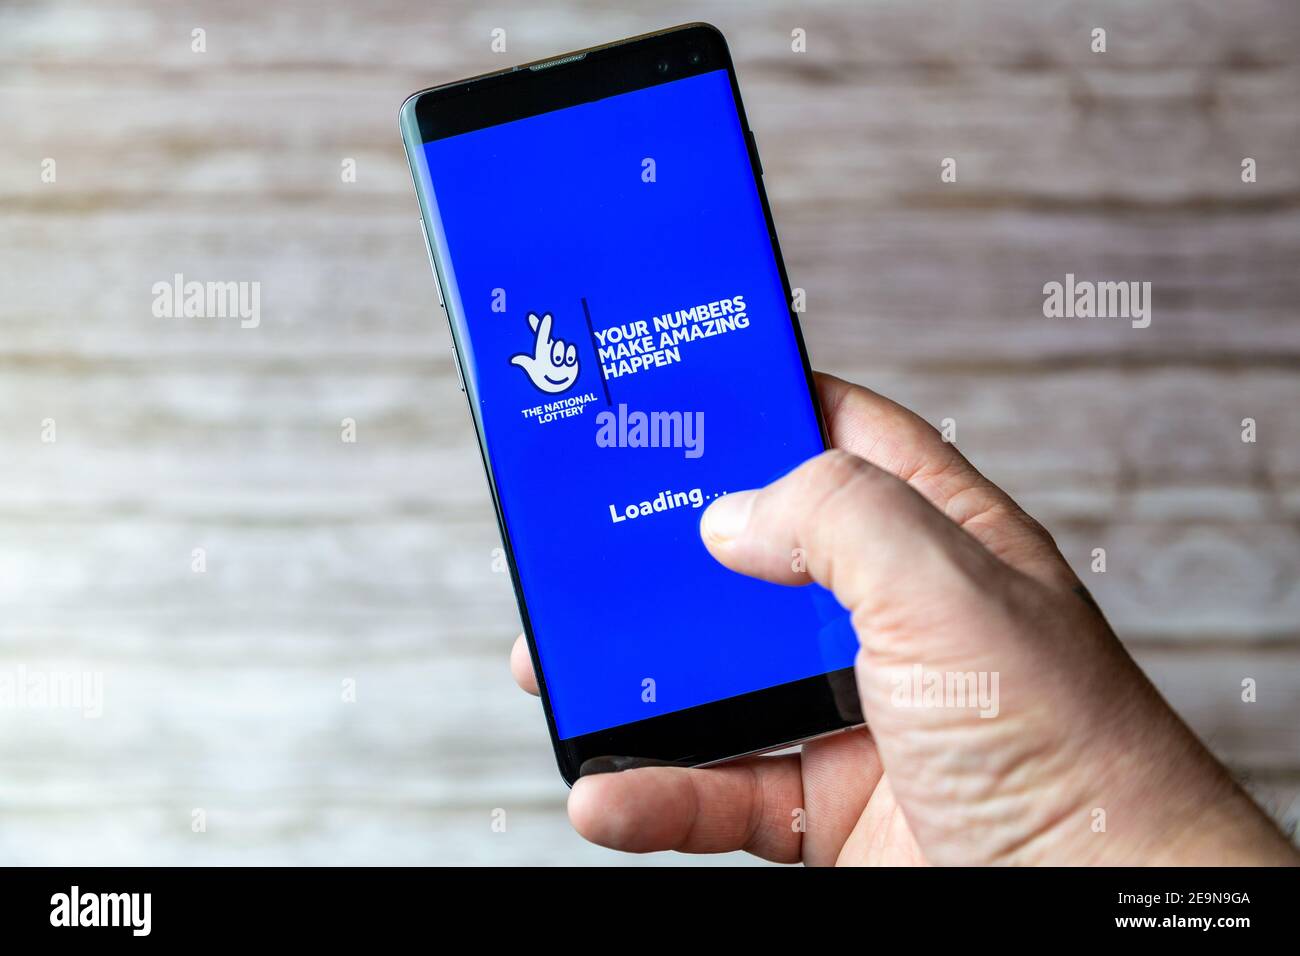 A Mobile phone or cell phone being held showing the National lottery or Lotto app open on screen Stock Photo